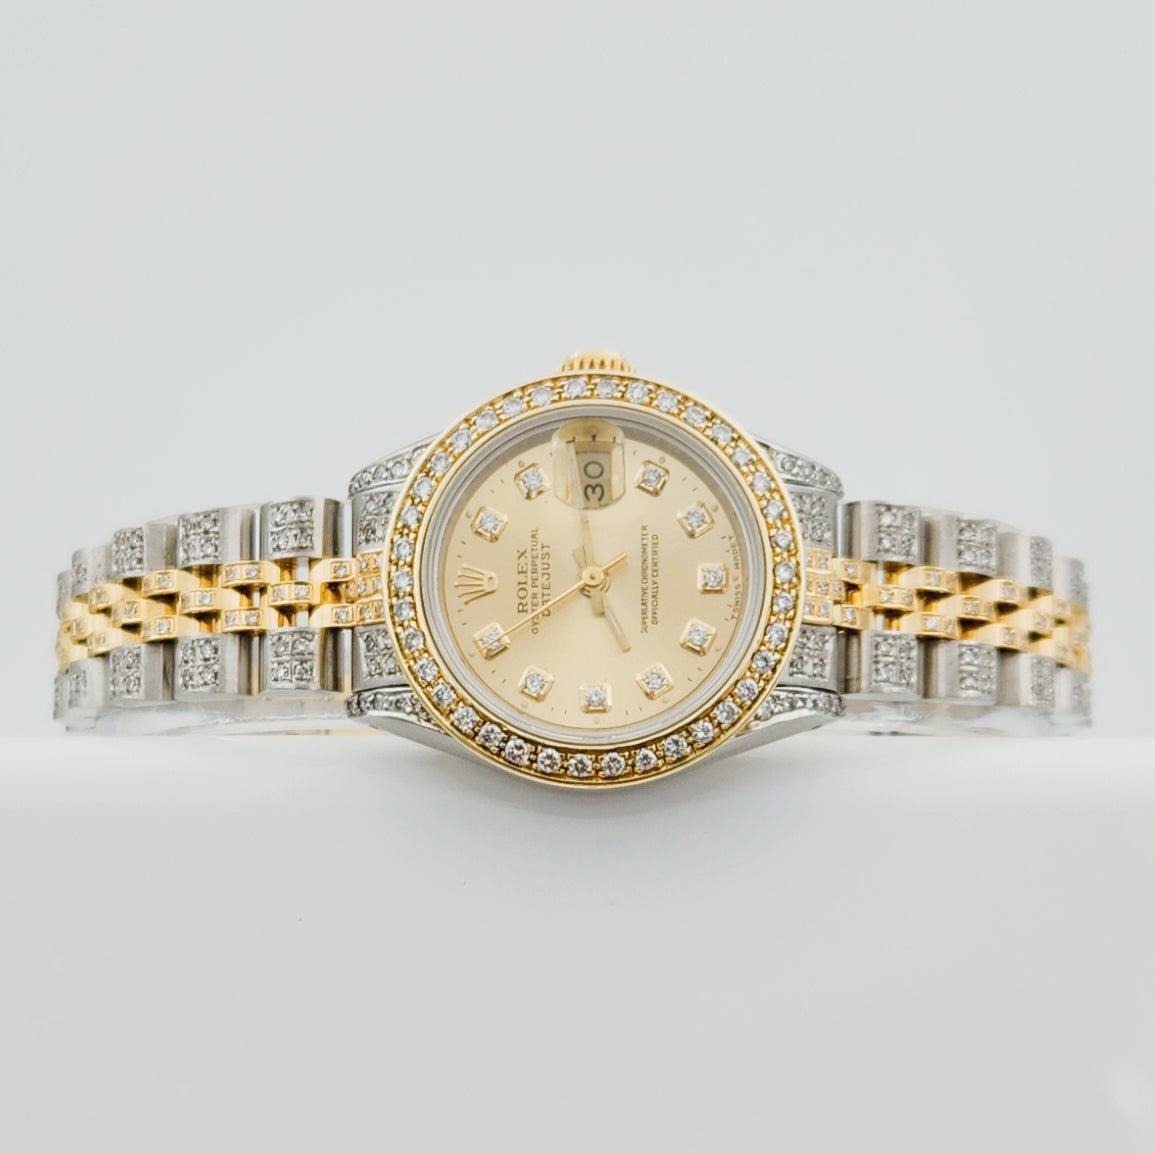 Ladies Rolex 26mm DateJust 18K Gold / Stainless Steel Watch with Diamond Band, Diamond Dial and Diamond Bezel. (Pre-Owned)